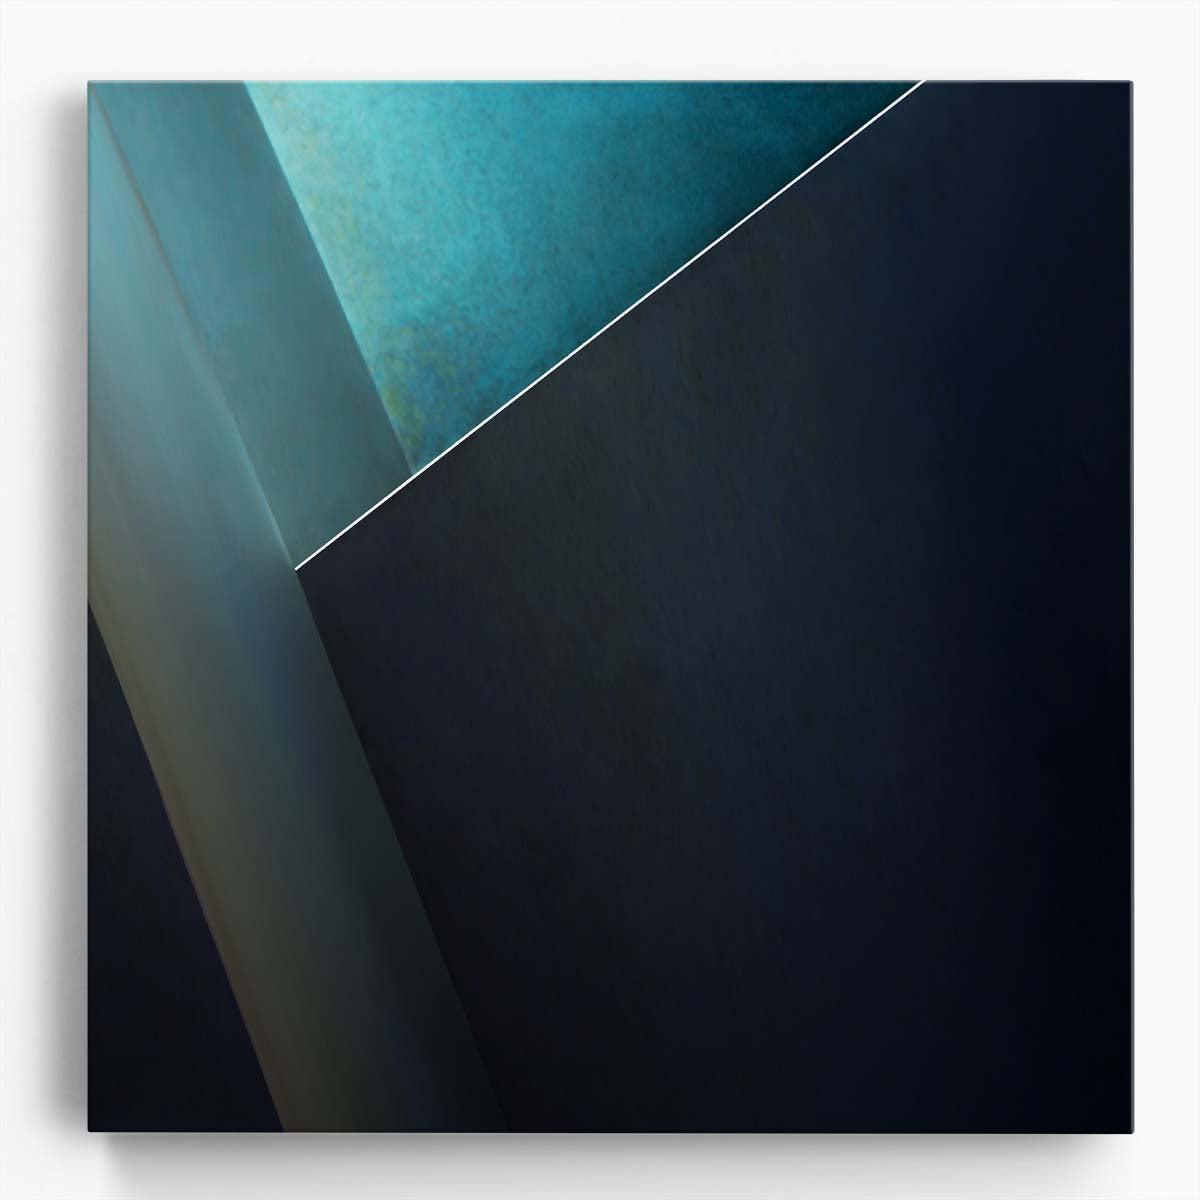 Abstract Teal Geometric Lines Minimalist Photography Wall Art by Luxuriance Designs. Made in USA.